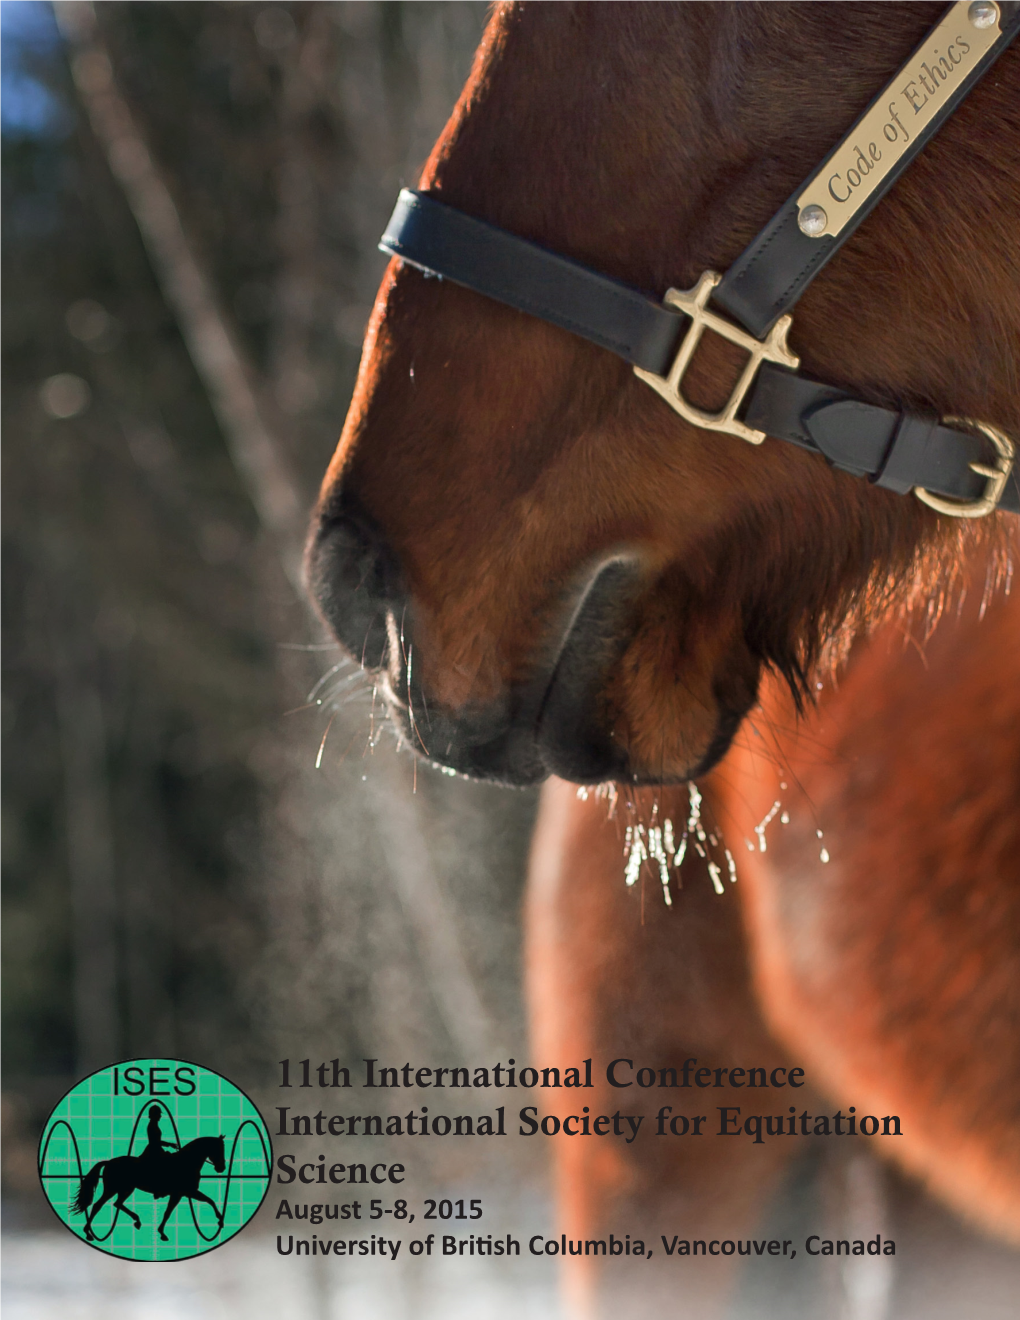 11Th International Conference International Society for Equitation Science August 5-8, 2015 University of British Columbia, Vancouver, Canada